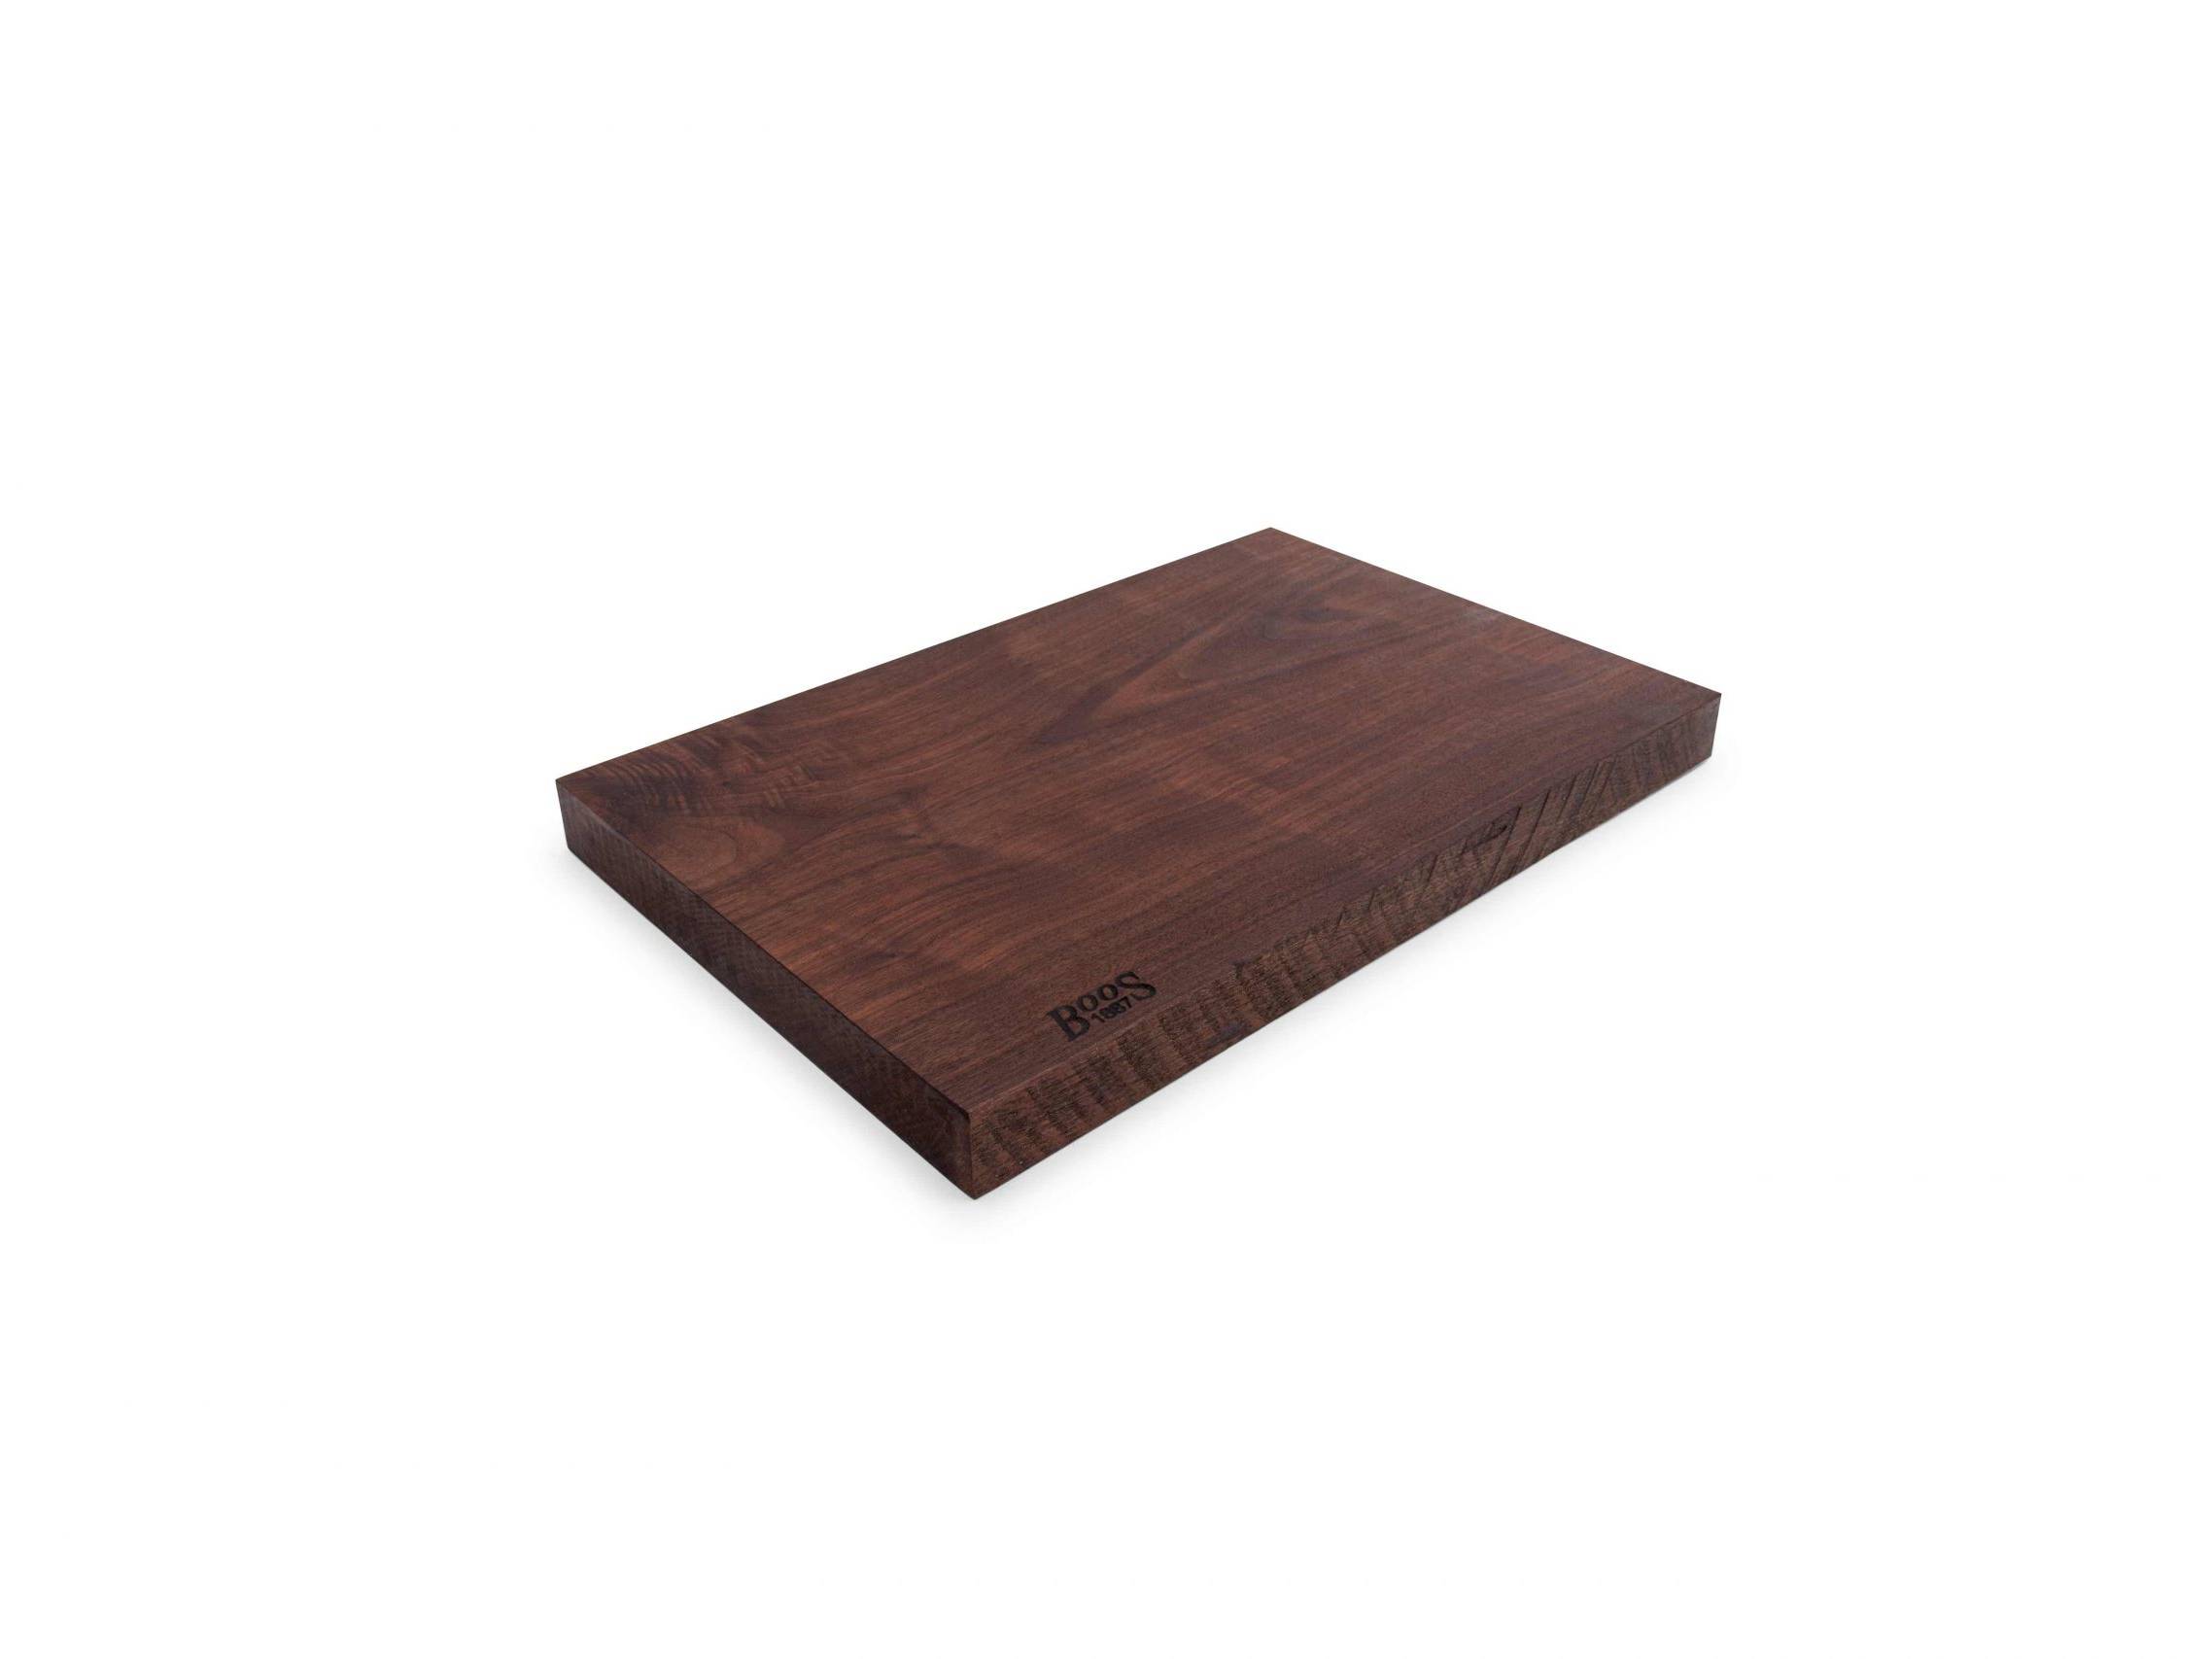 Boos 1887 / Rustic Edge one piece cutting board; Black Walnut; can be used on both sides 71